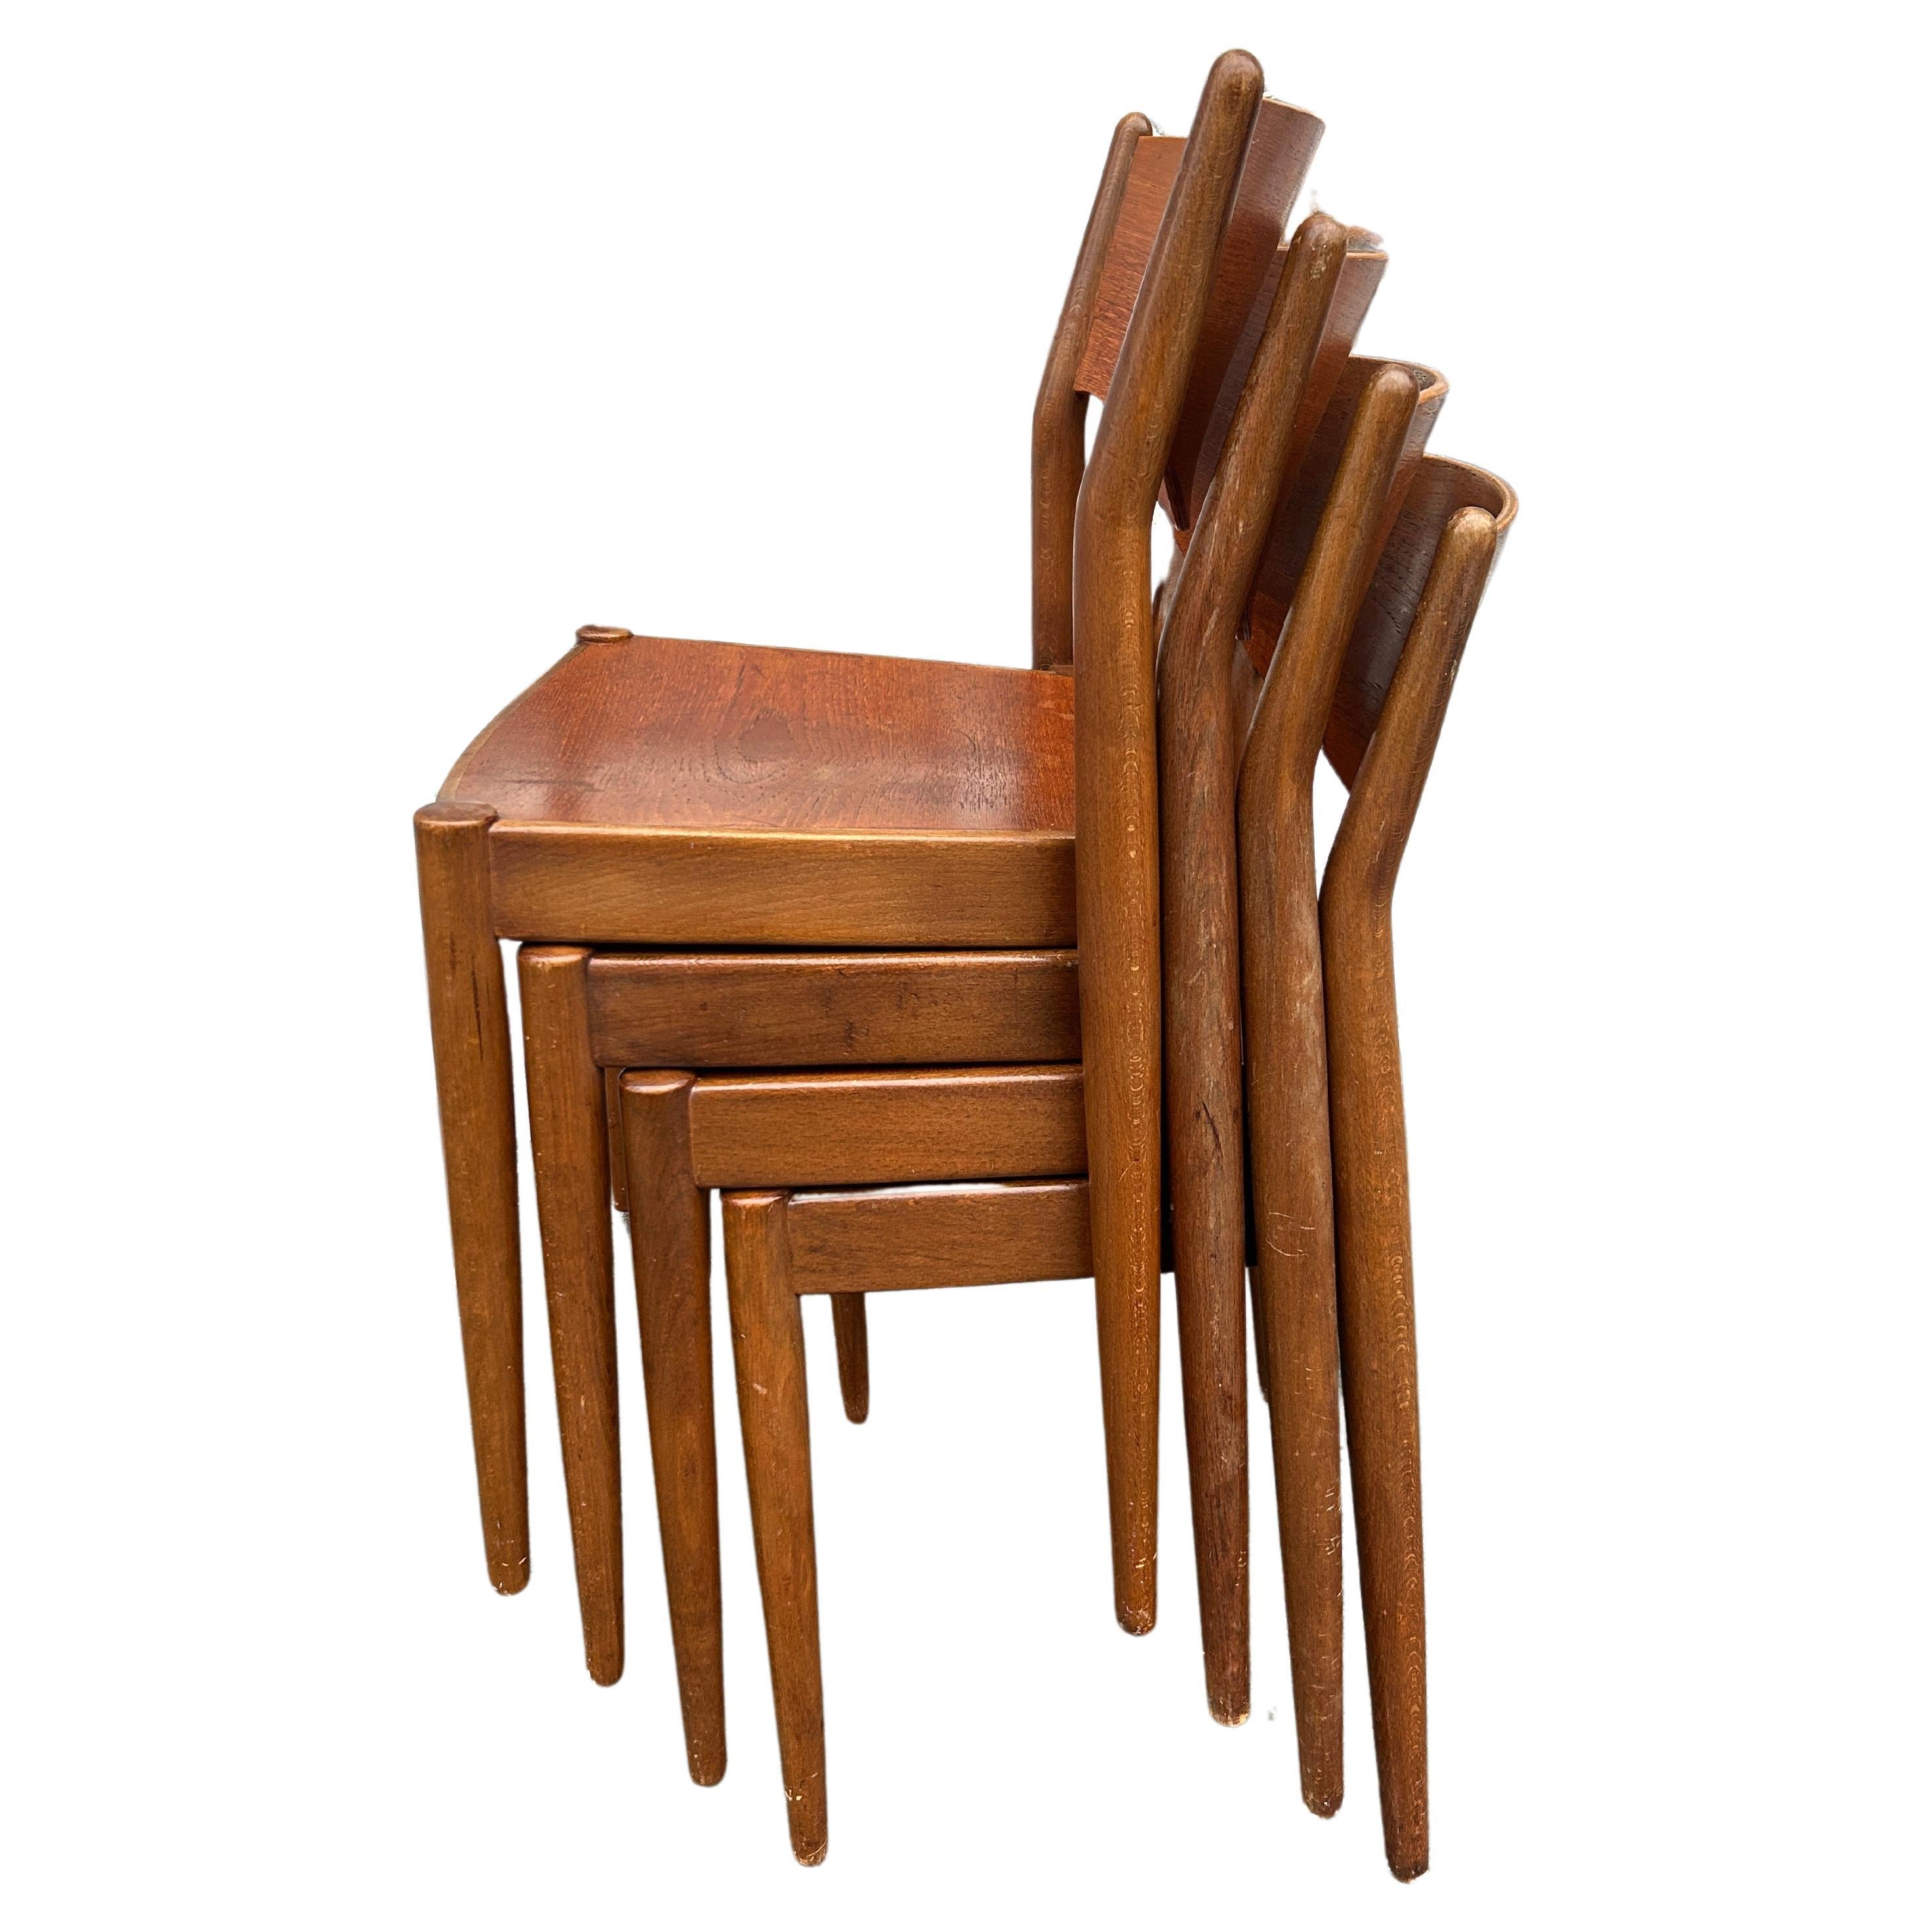 4 Borge Mogensen Stacking Teak Dining Chairs for C.M. Madsen. Set of 4 matching stacking chairs. All in good vintage condition labeled on bottom of seat. Made in Denmark. Located in Brooklyn NYC.

Sold as a set of (4) chairs.